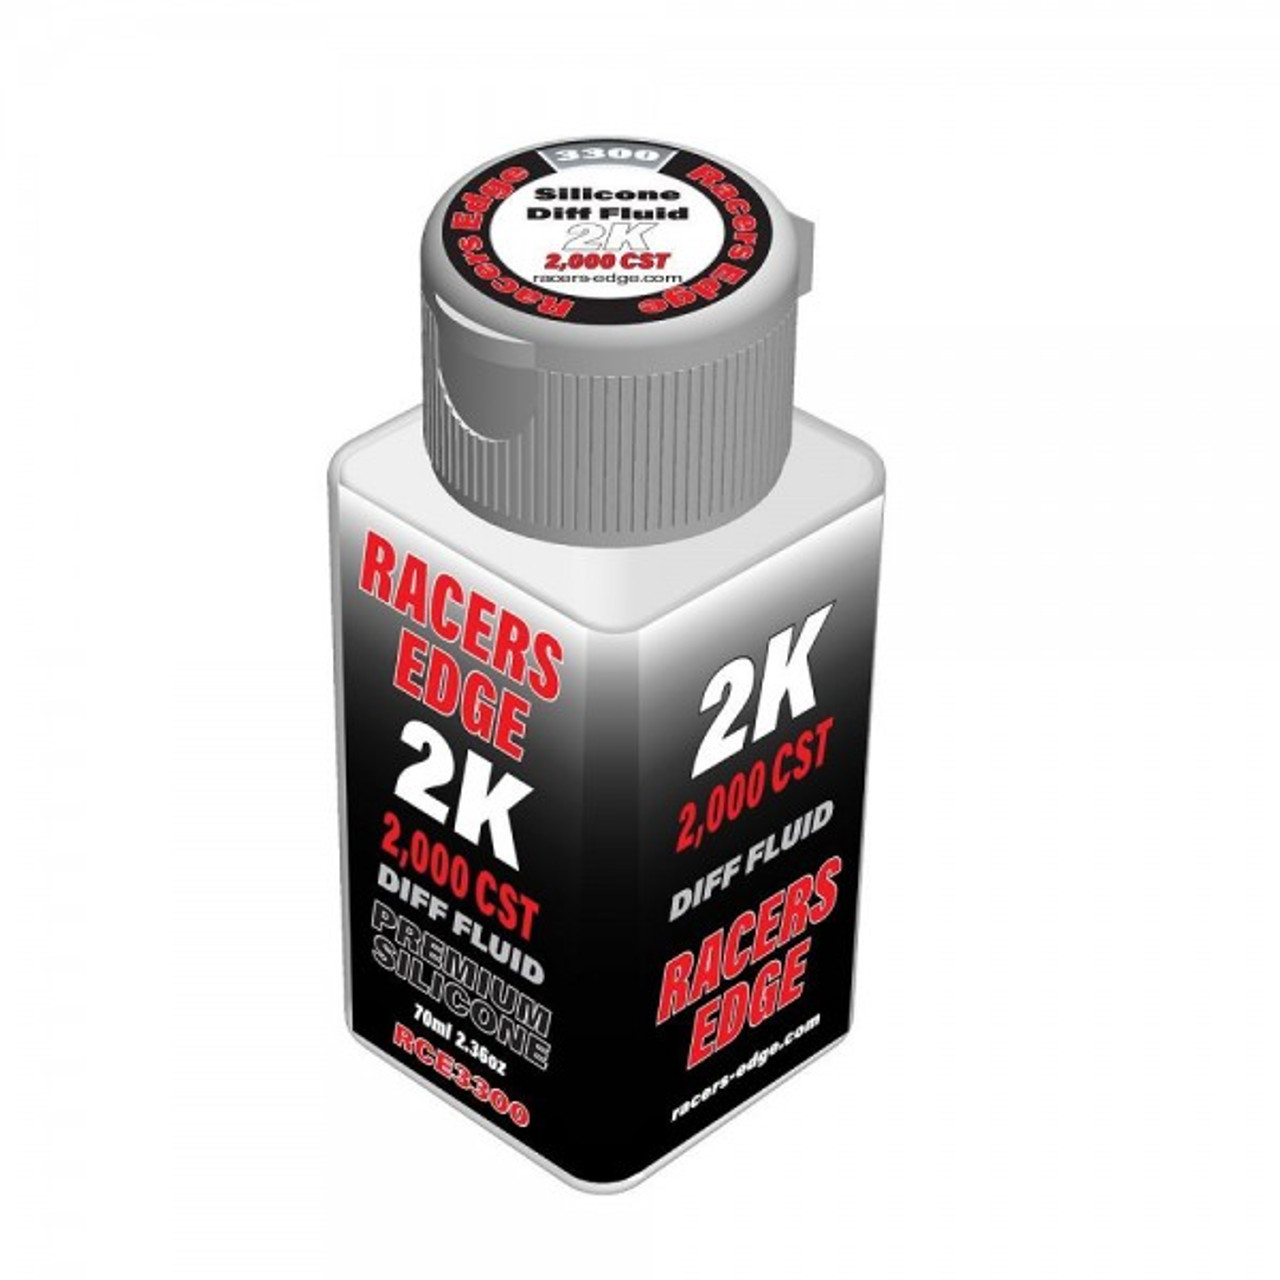 Racers Edge 2,000cSt 70ml 2.36oz Pure Silicone Diff Fluid